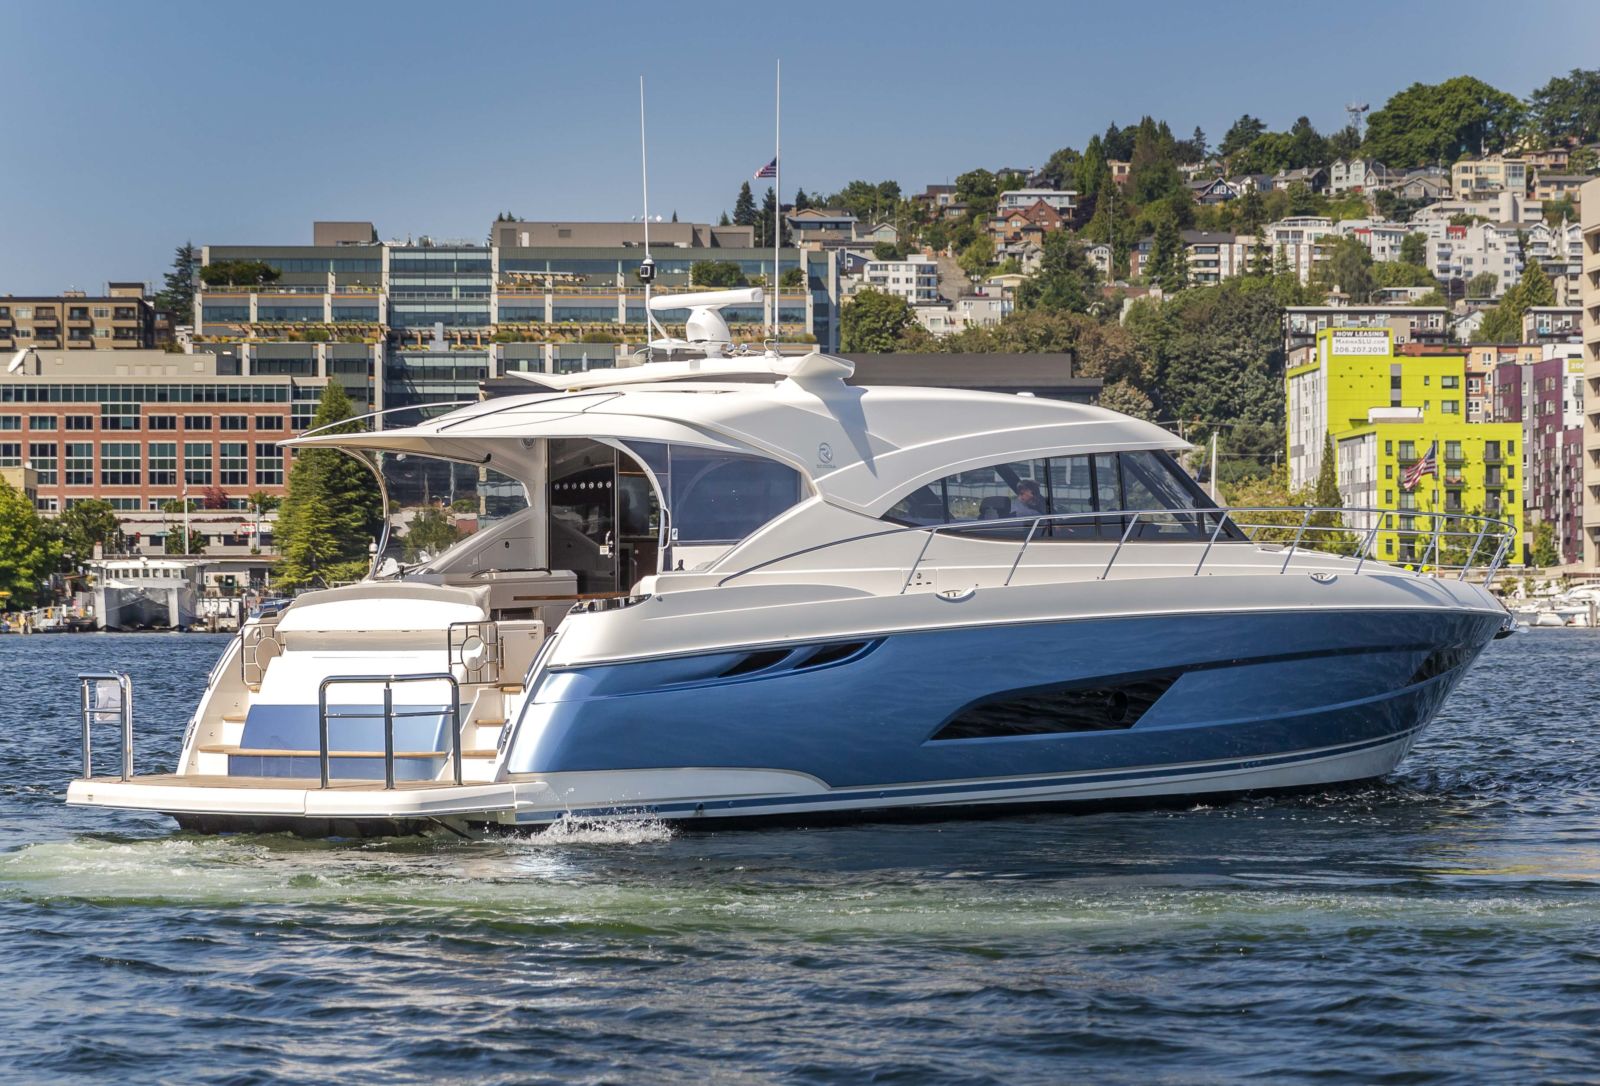 emerald pacific yachts seattle